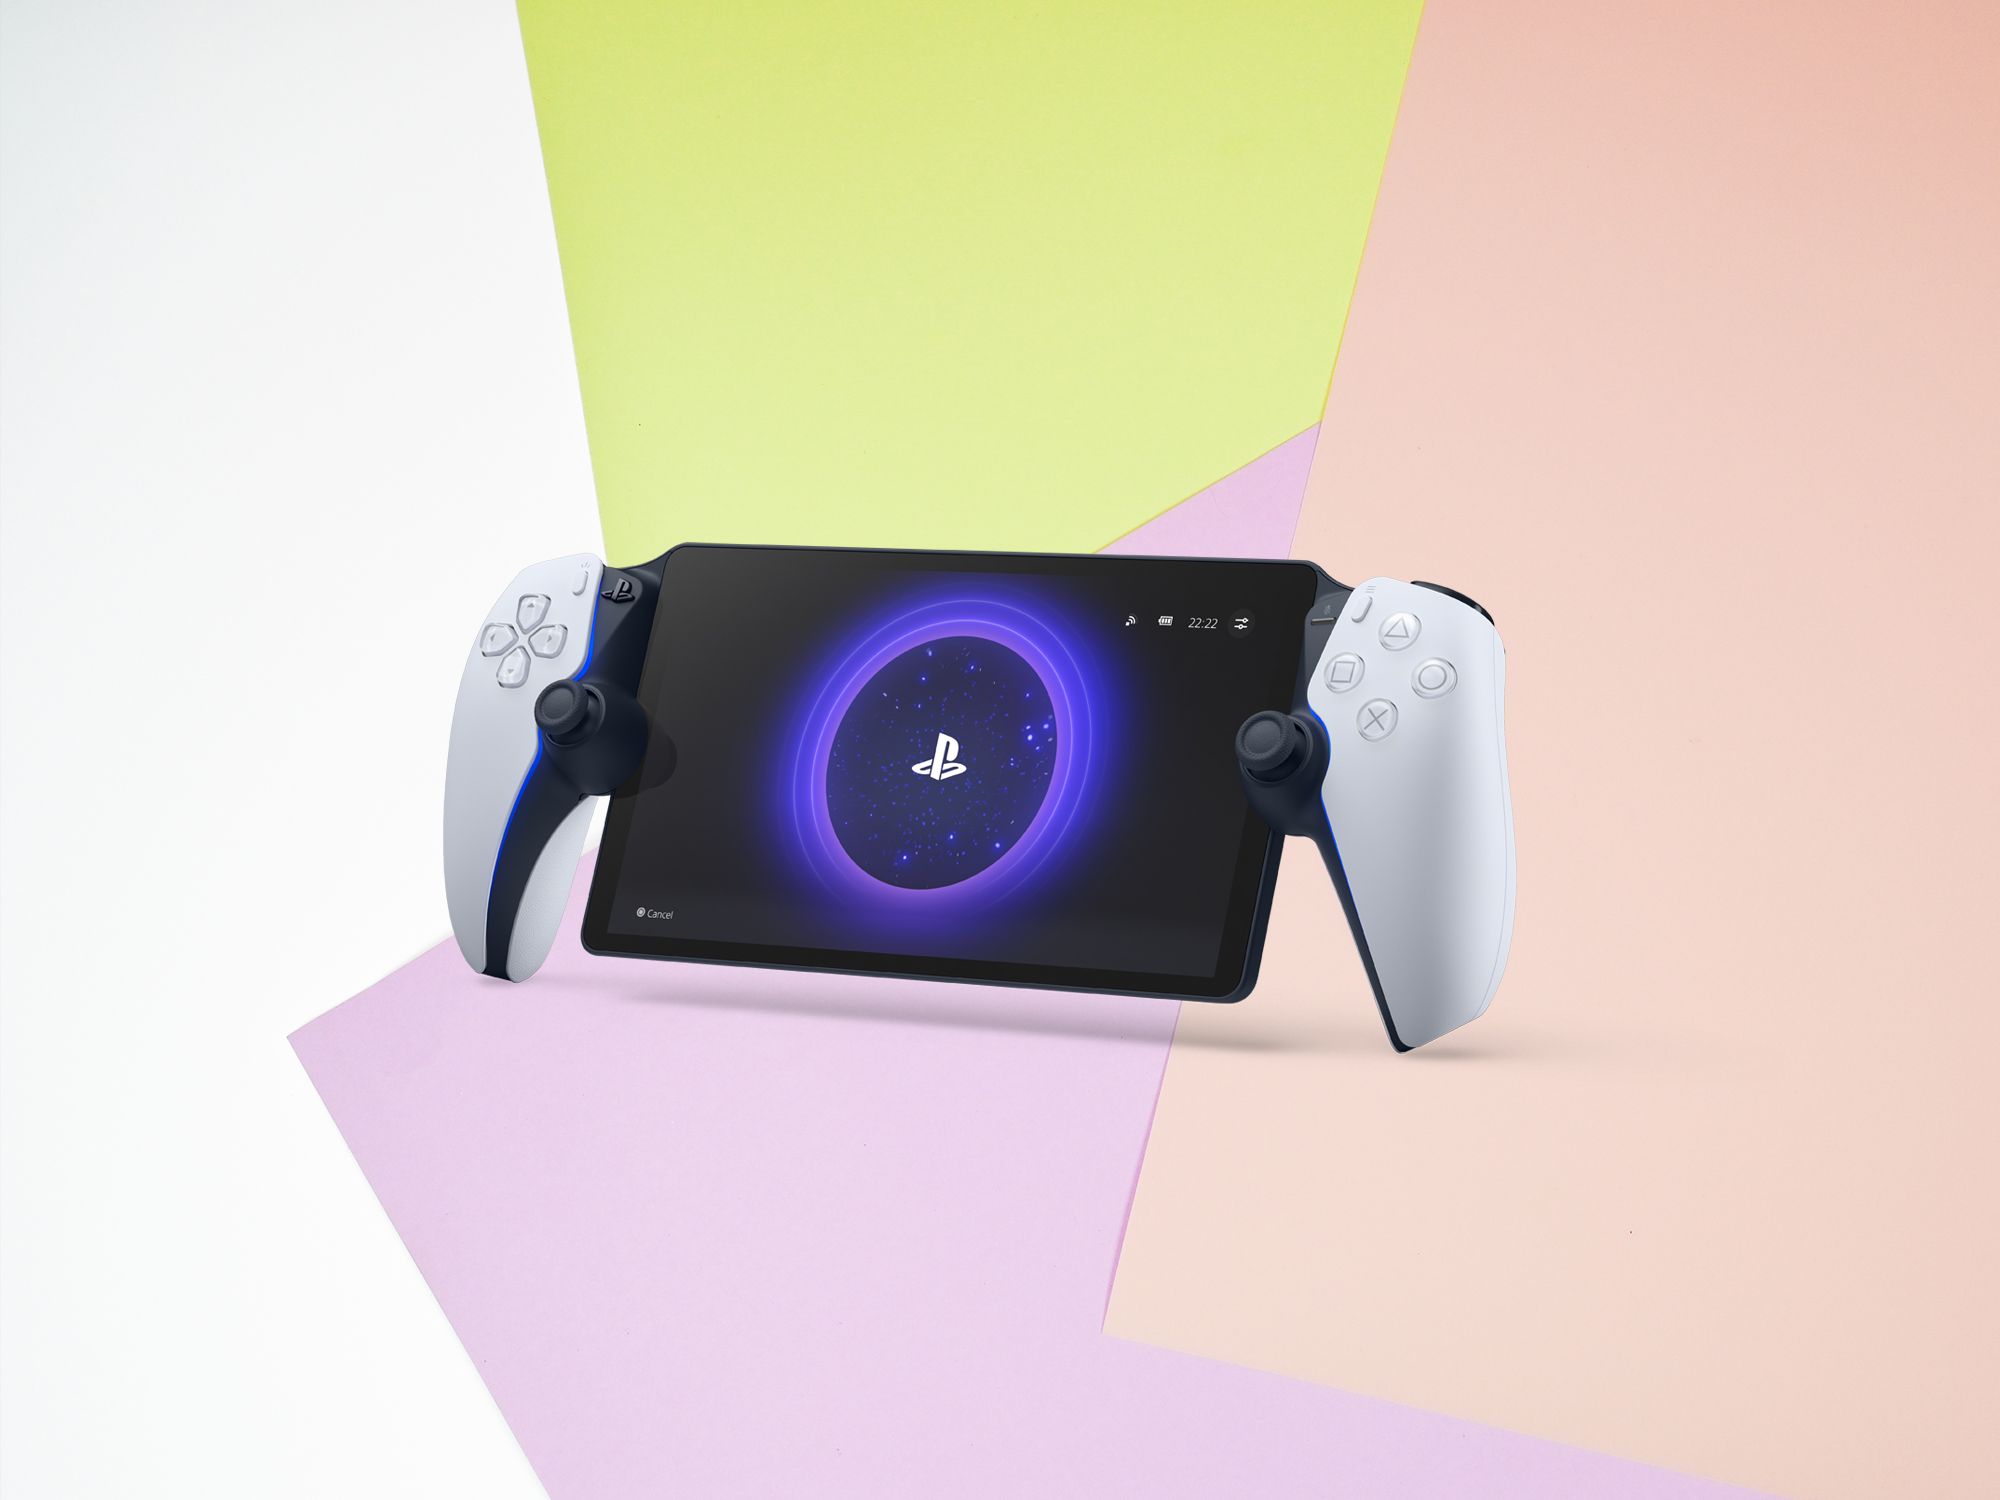 Playstation Portal: Release Date, Price, & Where To Buy?